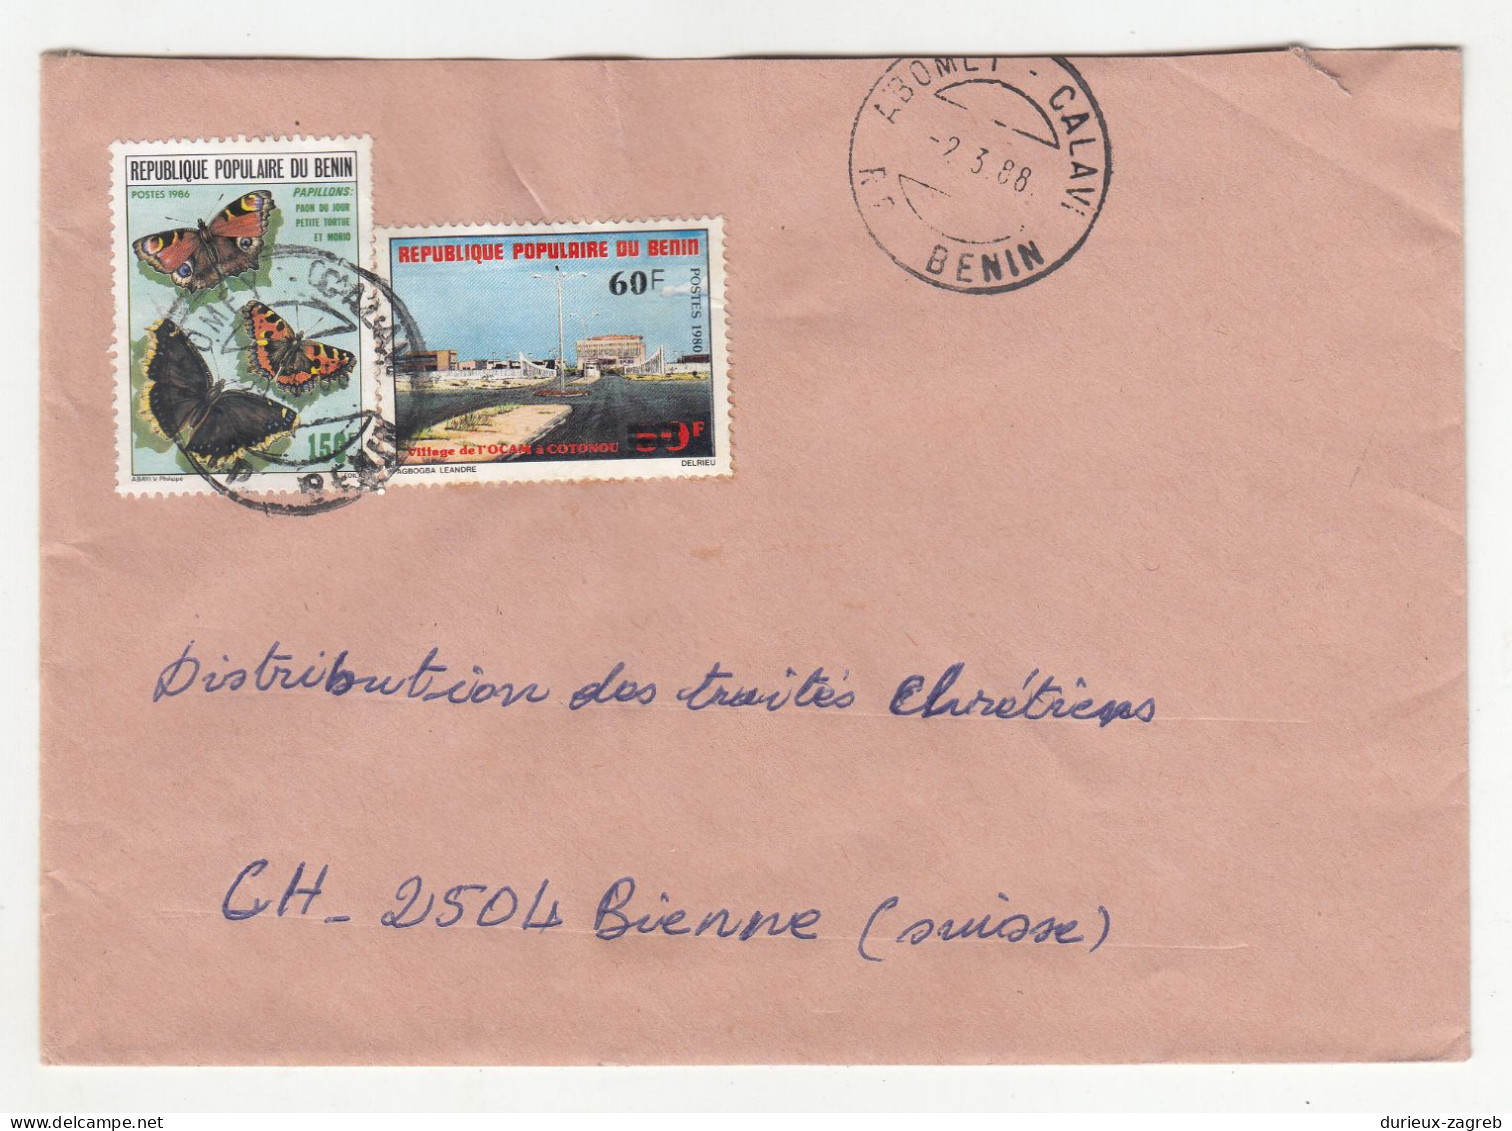 Benin 16 letter covers posted 1979-1988 to Switzerland b240510